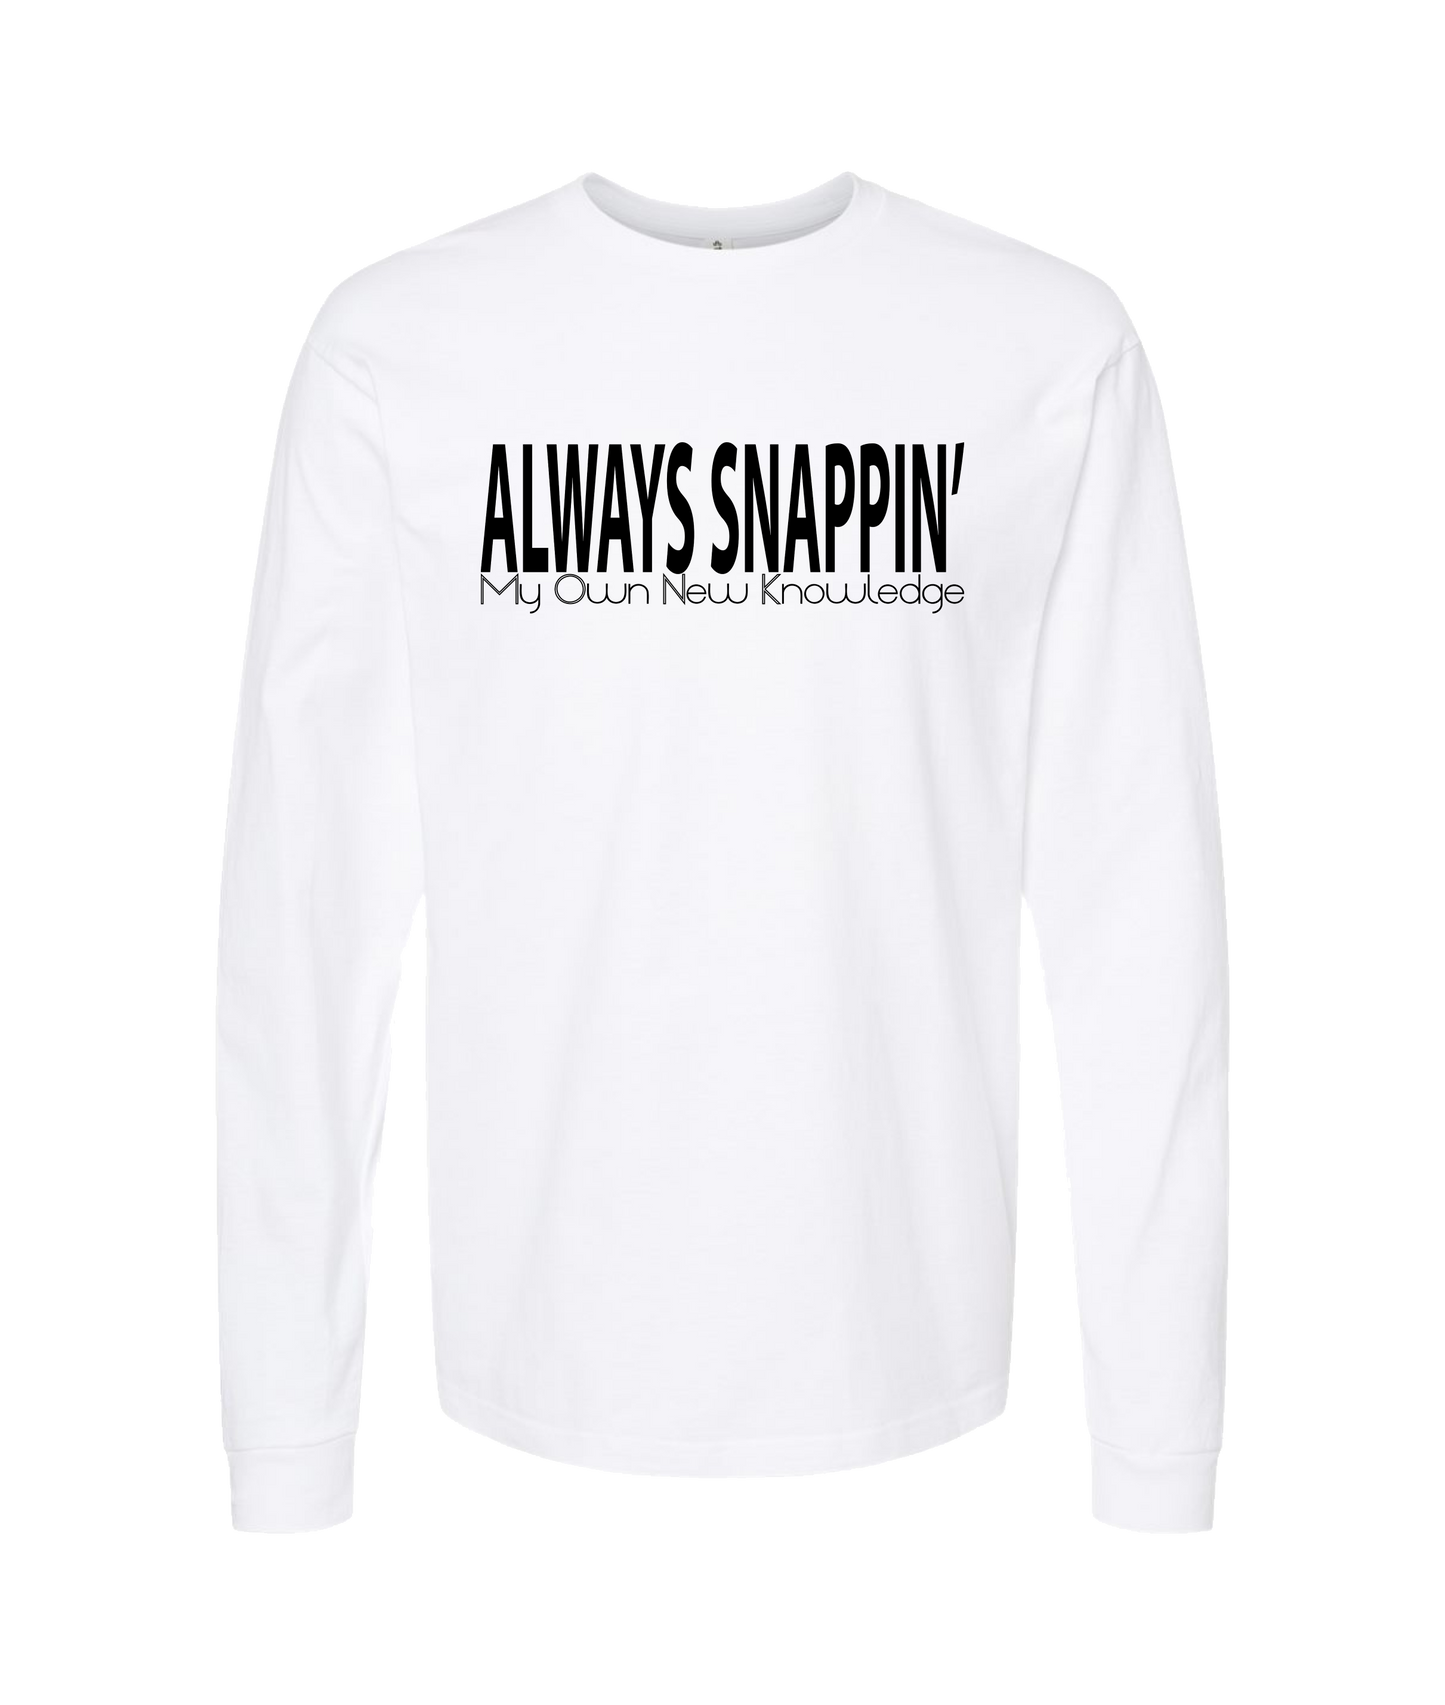 Monk Melville - Always Snappin' - White Long Sleeve T